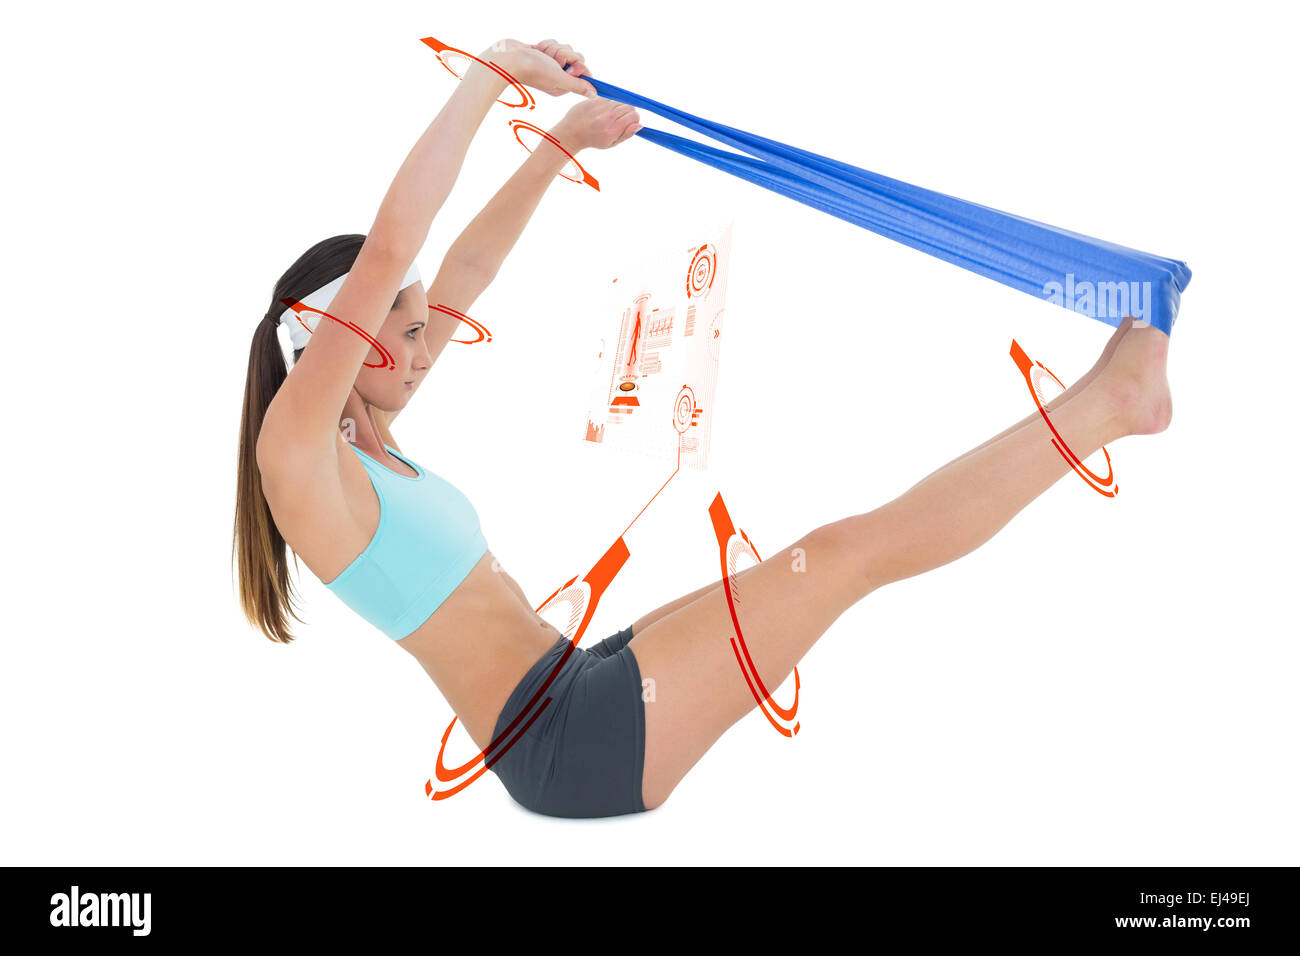 Composite image of fit young woman exercising with a blue yoga belt Stock Photo